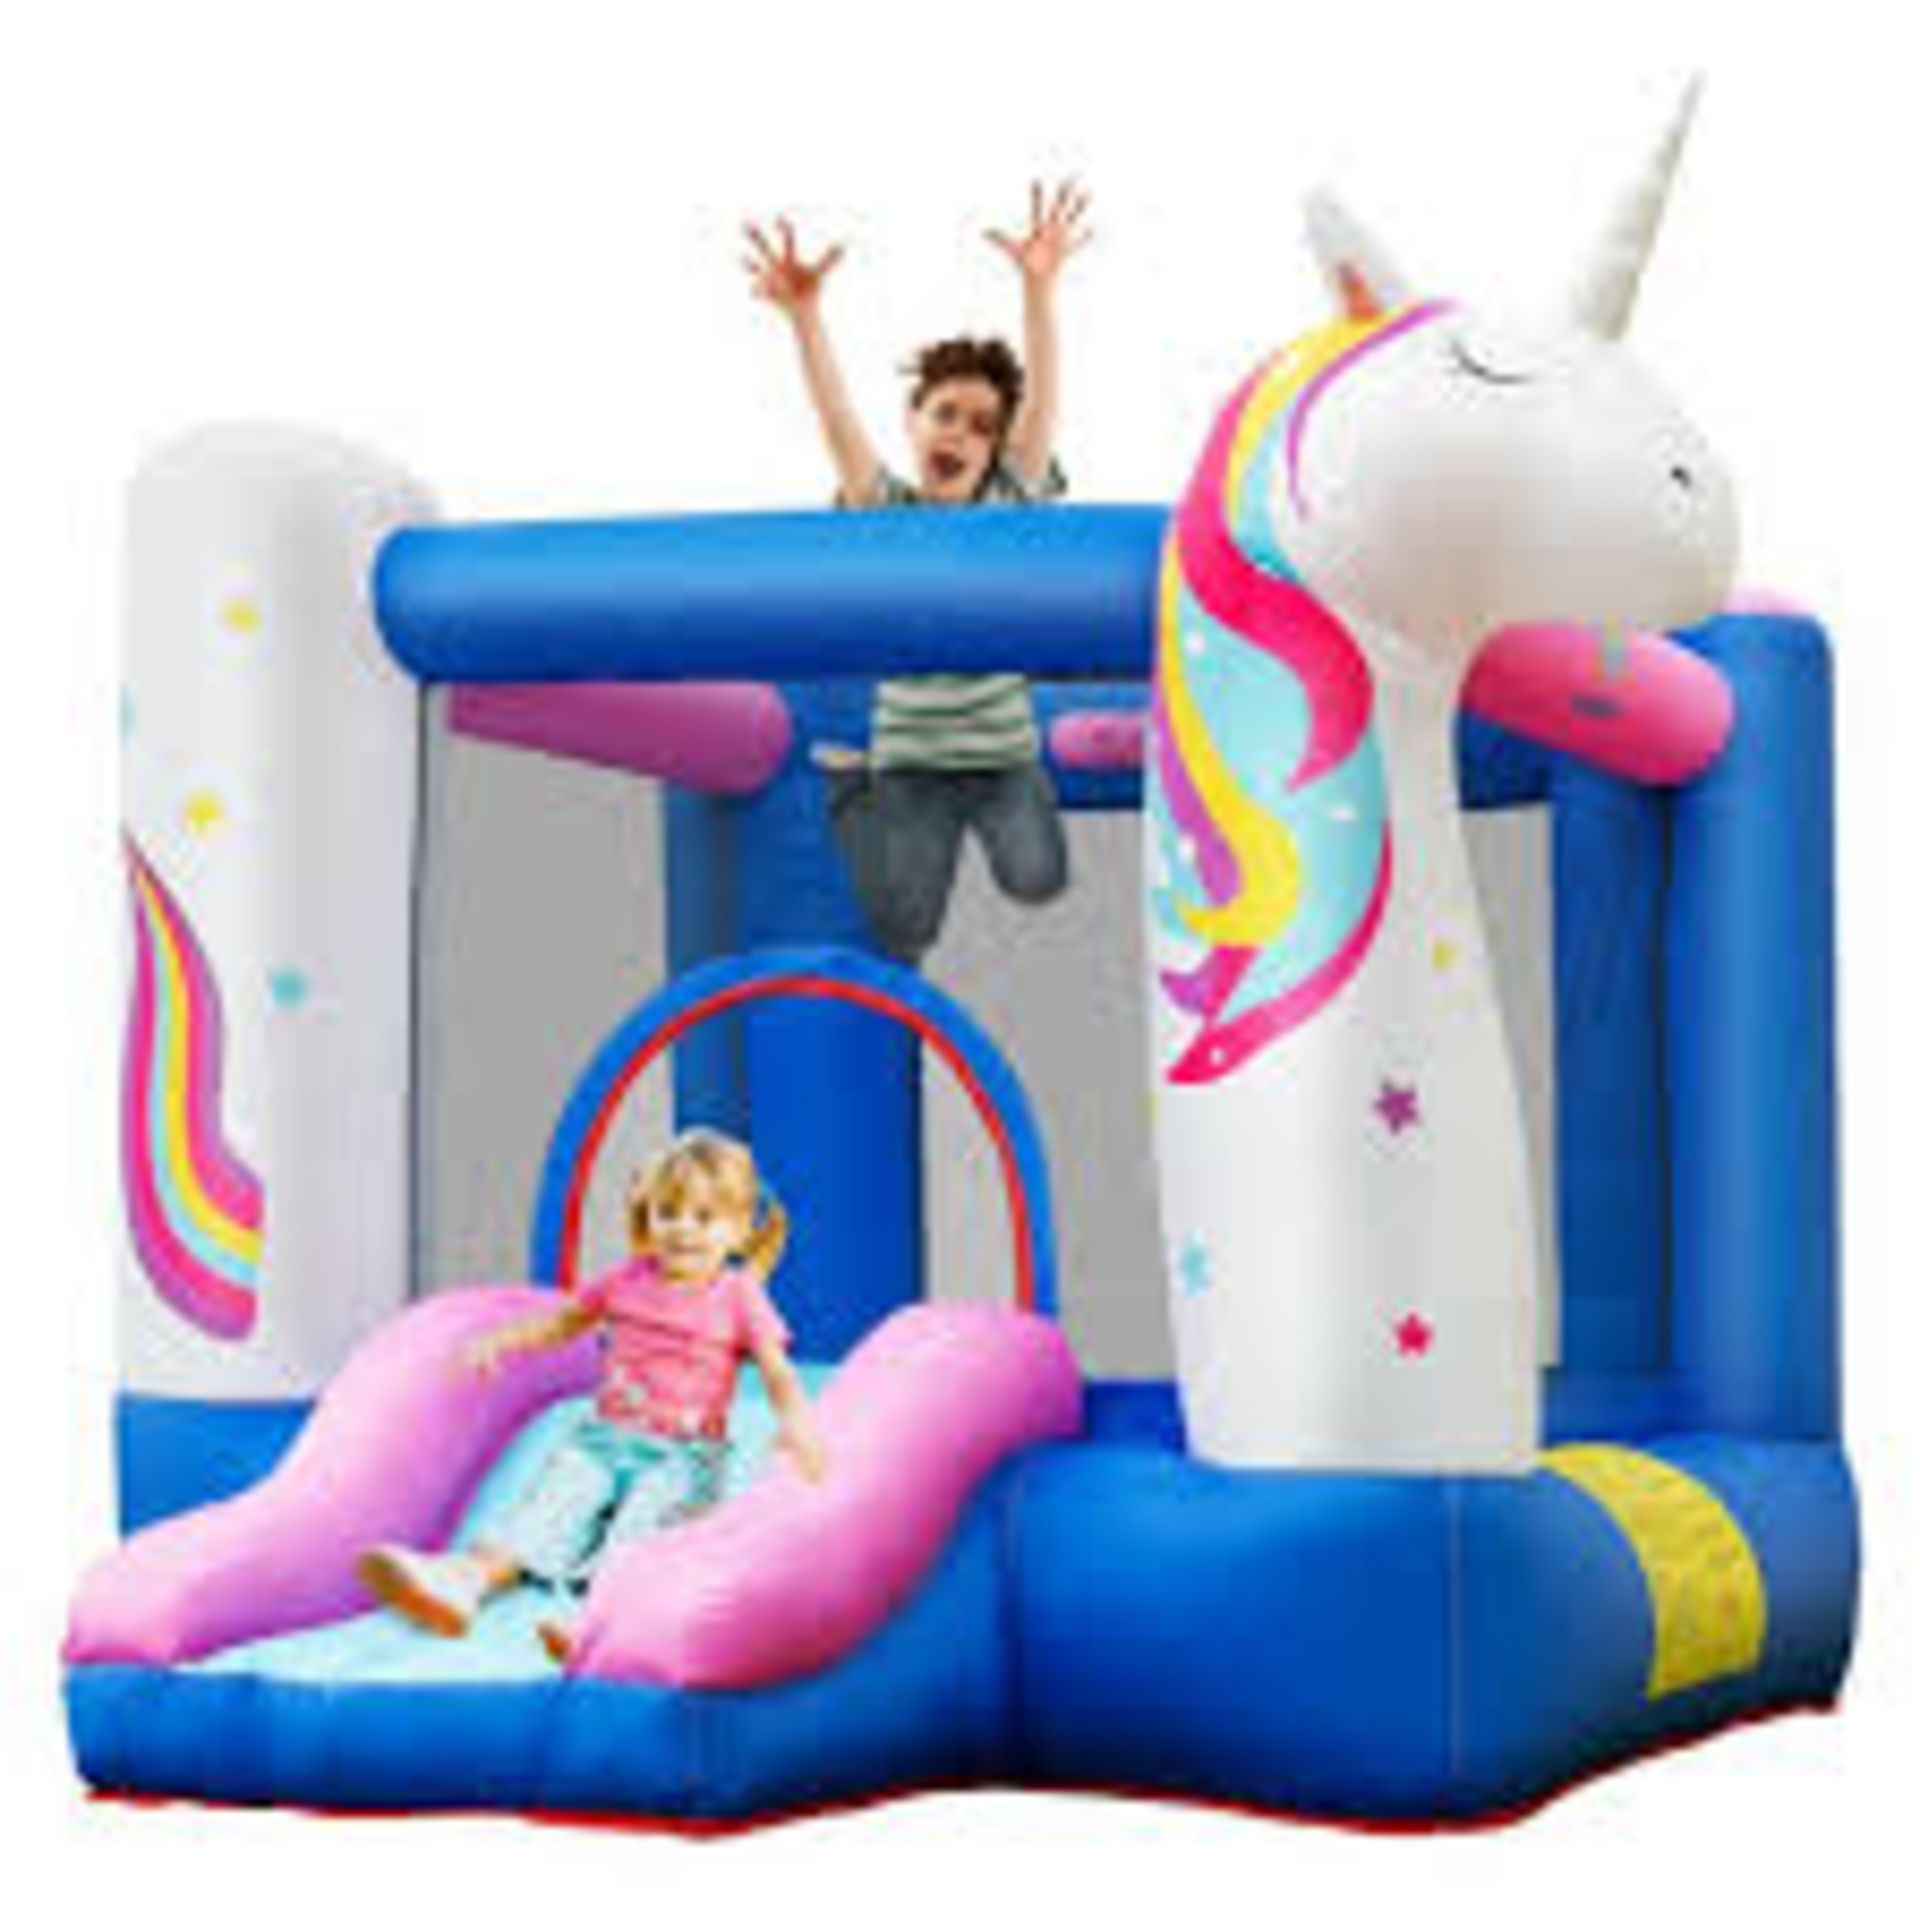 Inflatable Bounce House Unicorn Castle with Slide. - R14.13. This lovely unicorn inflatable bounce